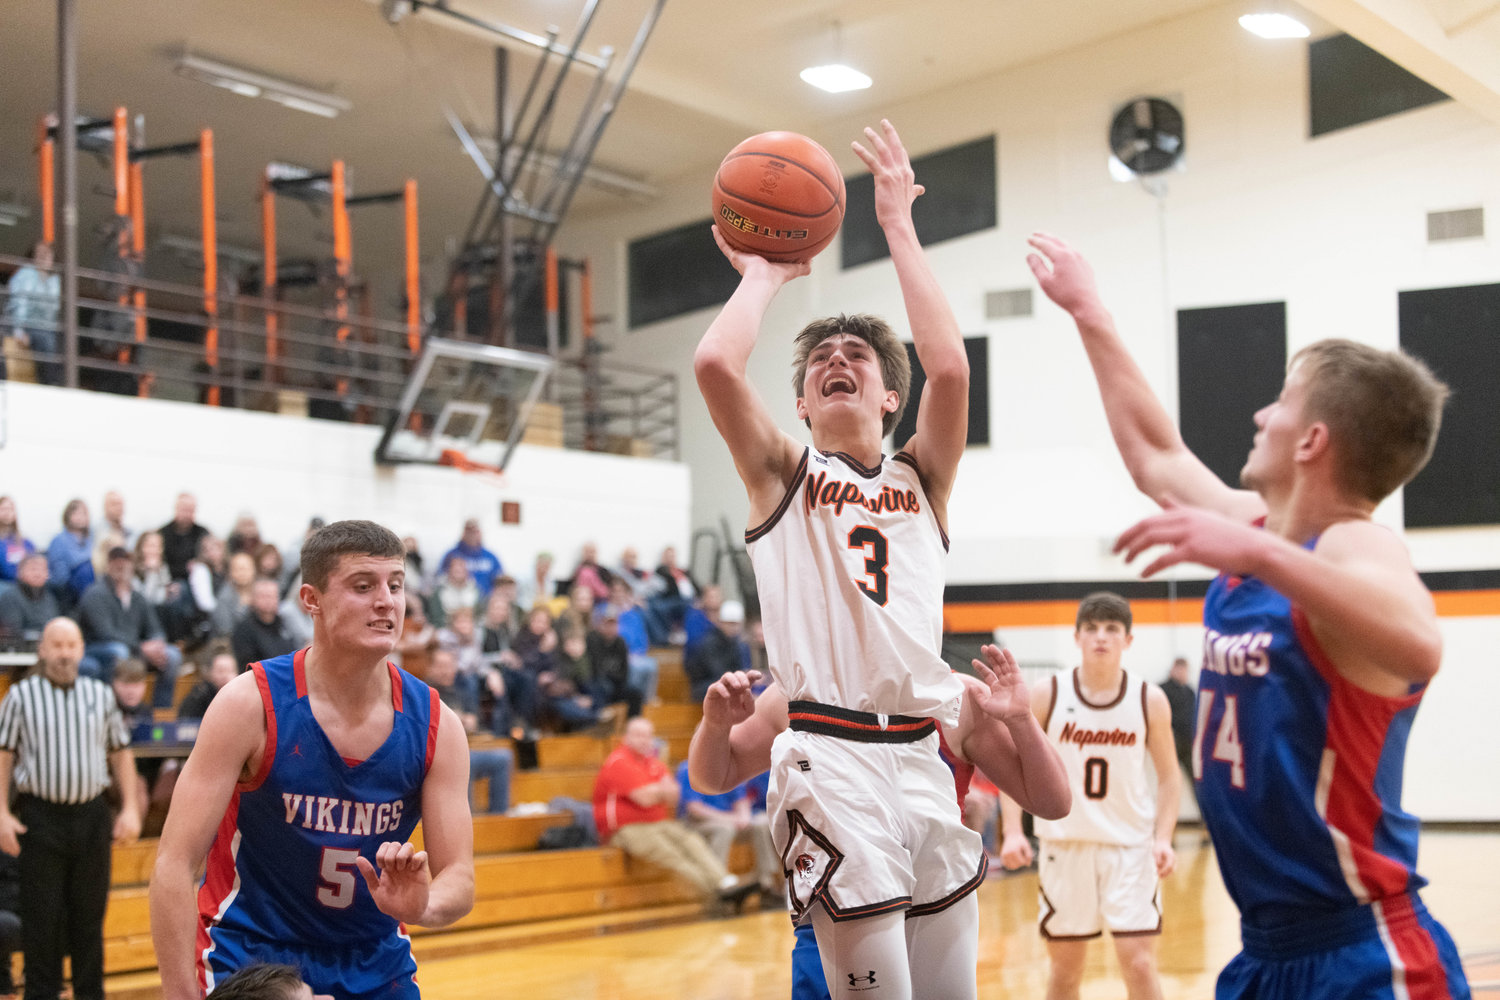 James Grose hits a short jumper in the lane during the fourth quarter of Napavine's 81-50 win over Willapa Valley to tie the Tigers' single-game scoring record.